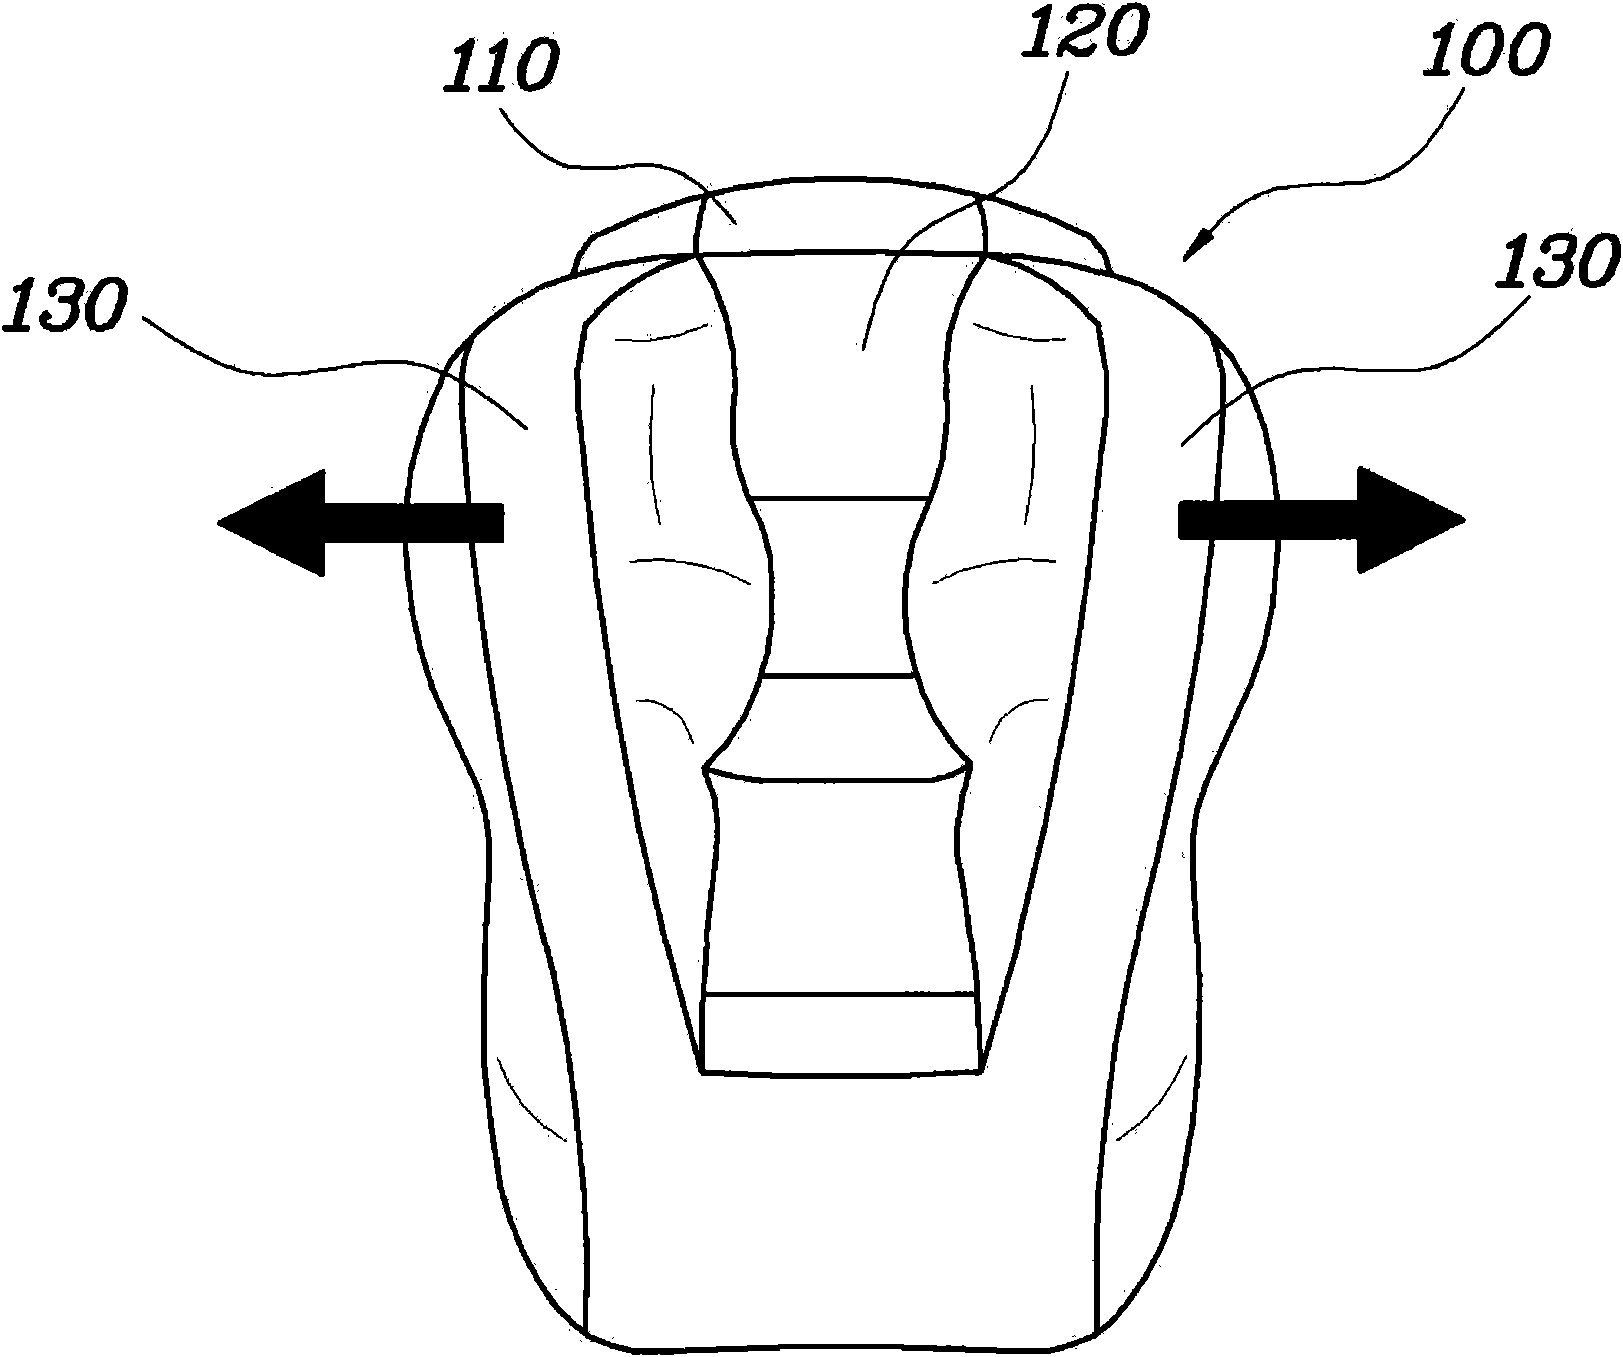 Airbag device for vehicles